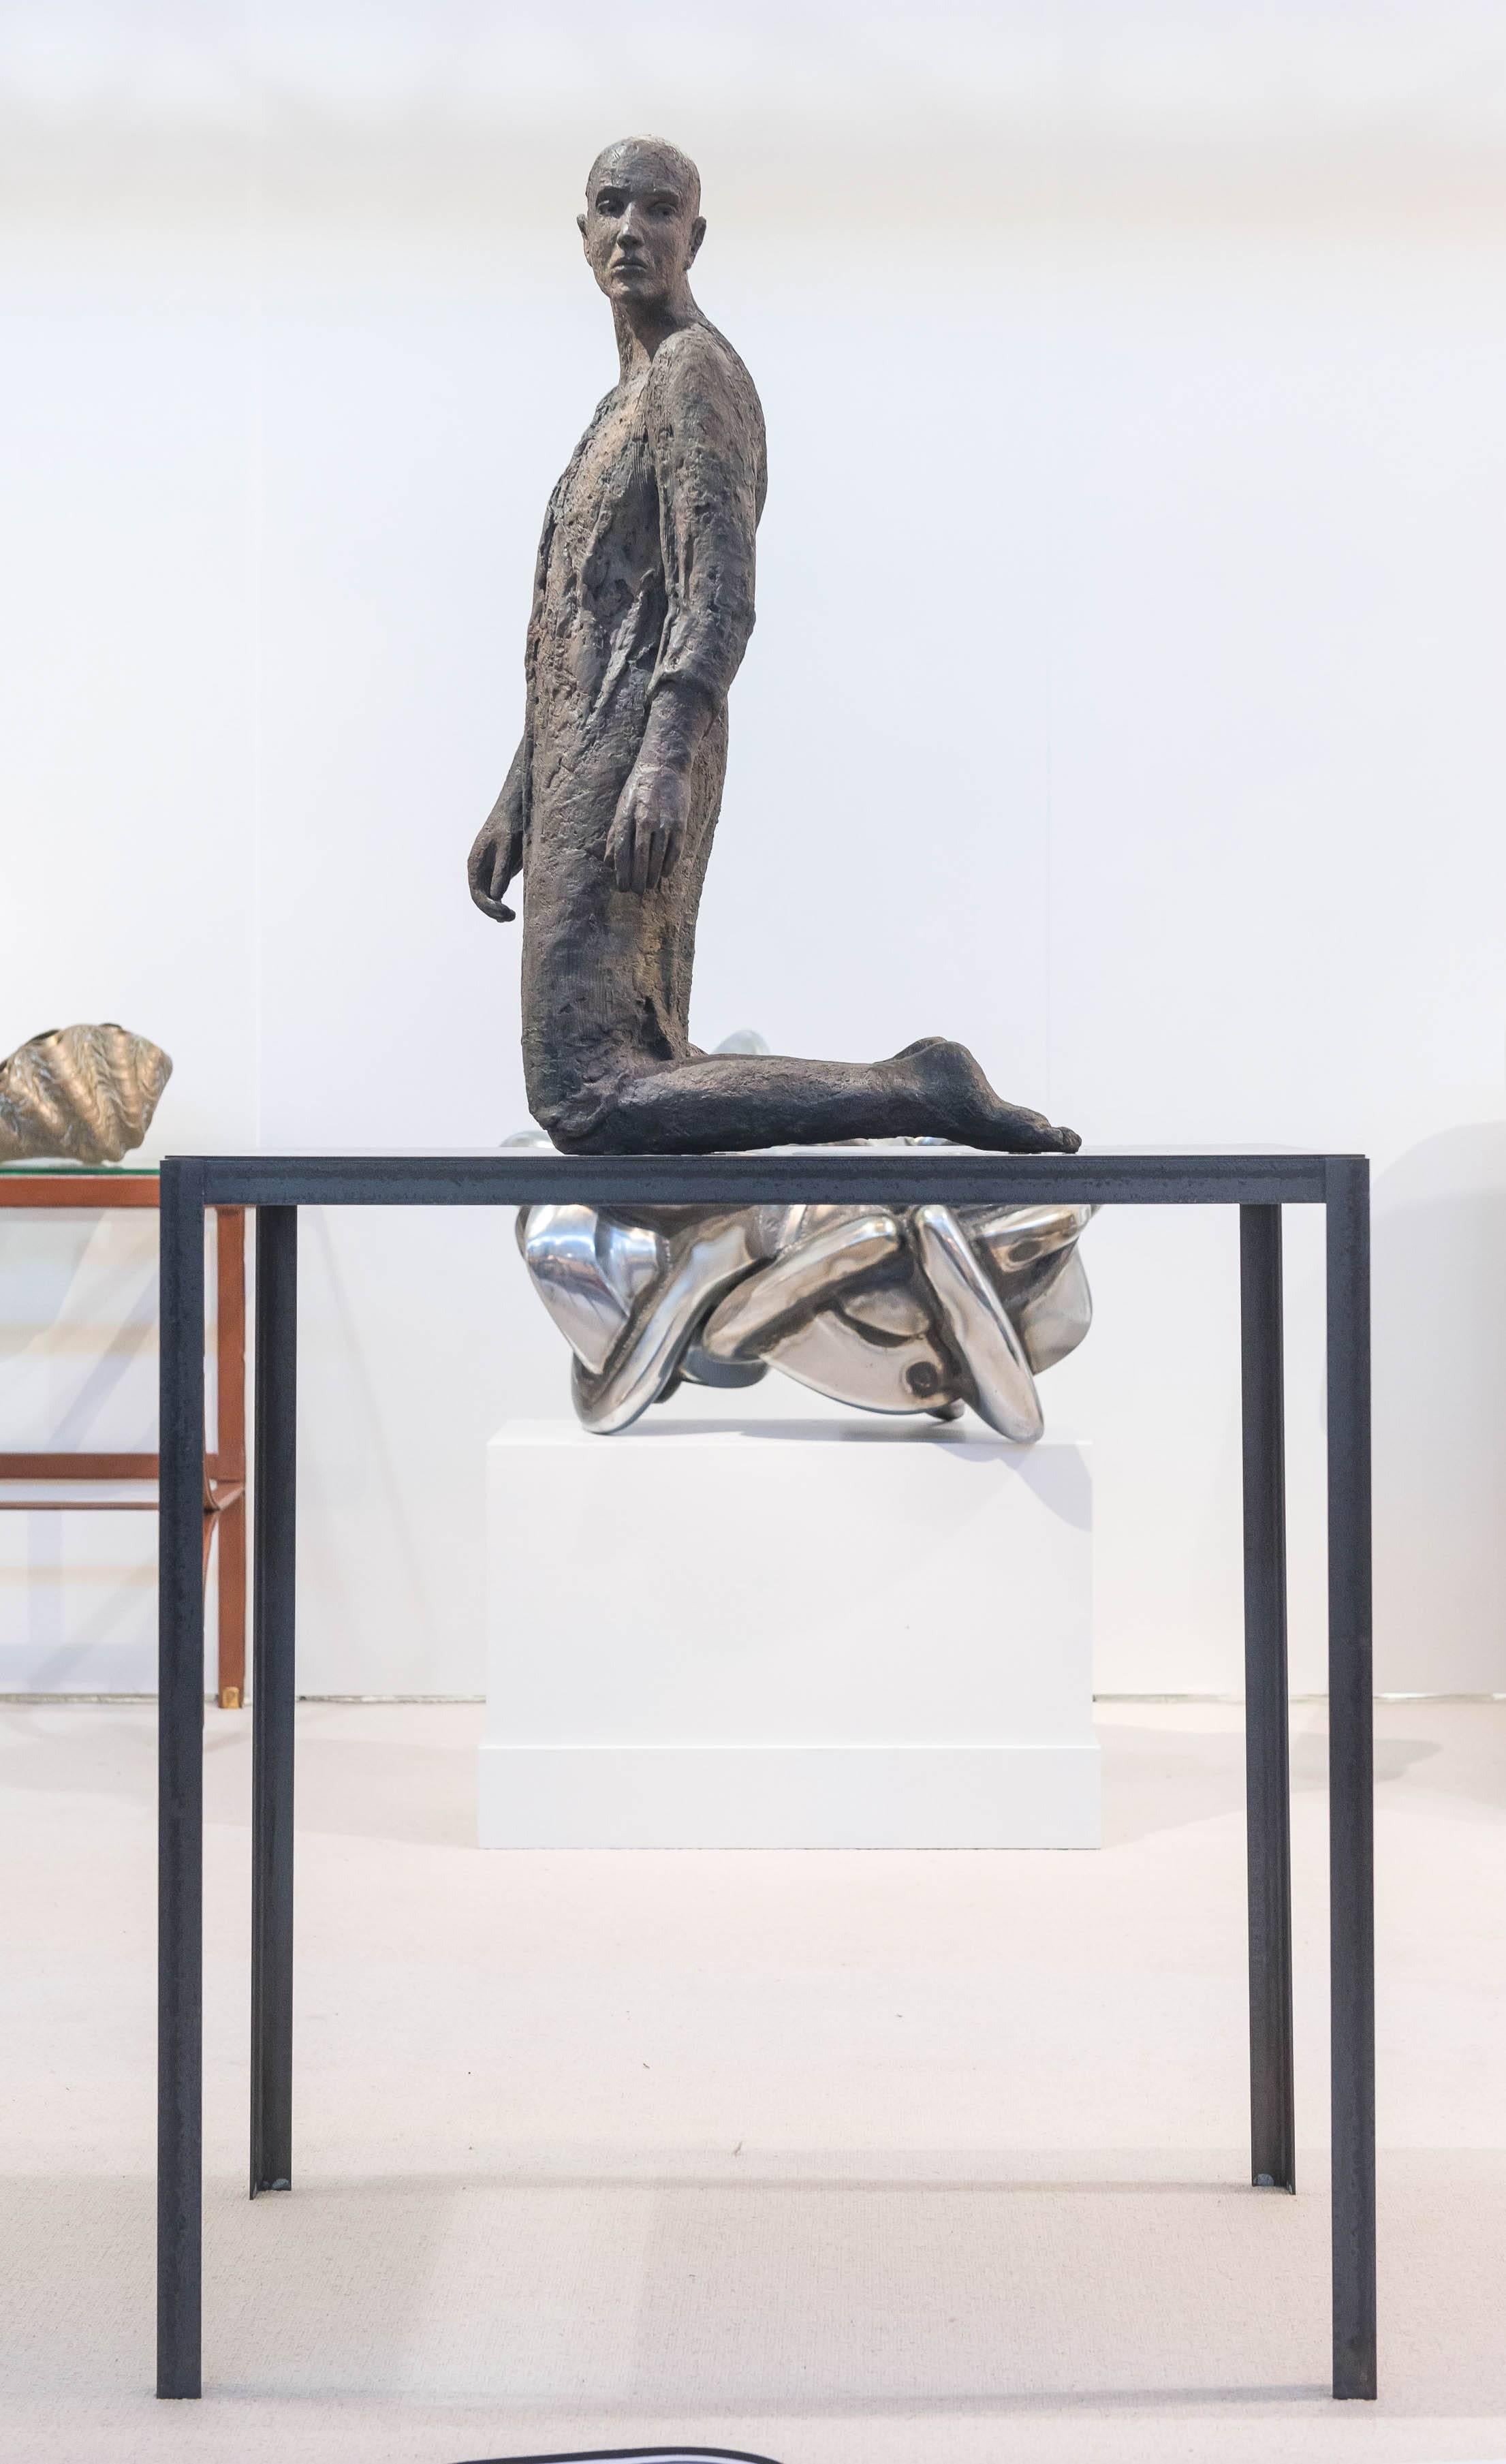 A remarkable, patinated bronze sculpture by Hanneke Beaumont (born 1947). 
"Melancholia I" from the Melancholia Series, signed H.B.
Executed in 1999 from an edition of 8.
Representing a kneeling meditative figure on a bronze